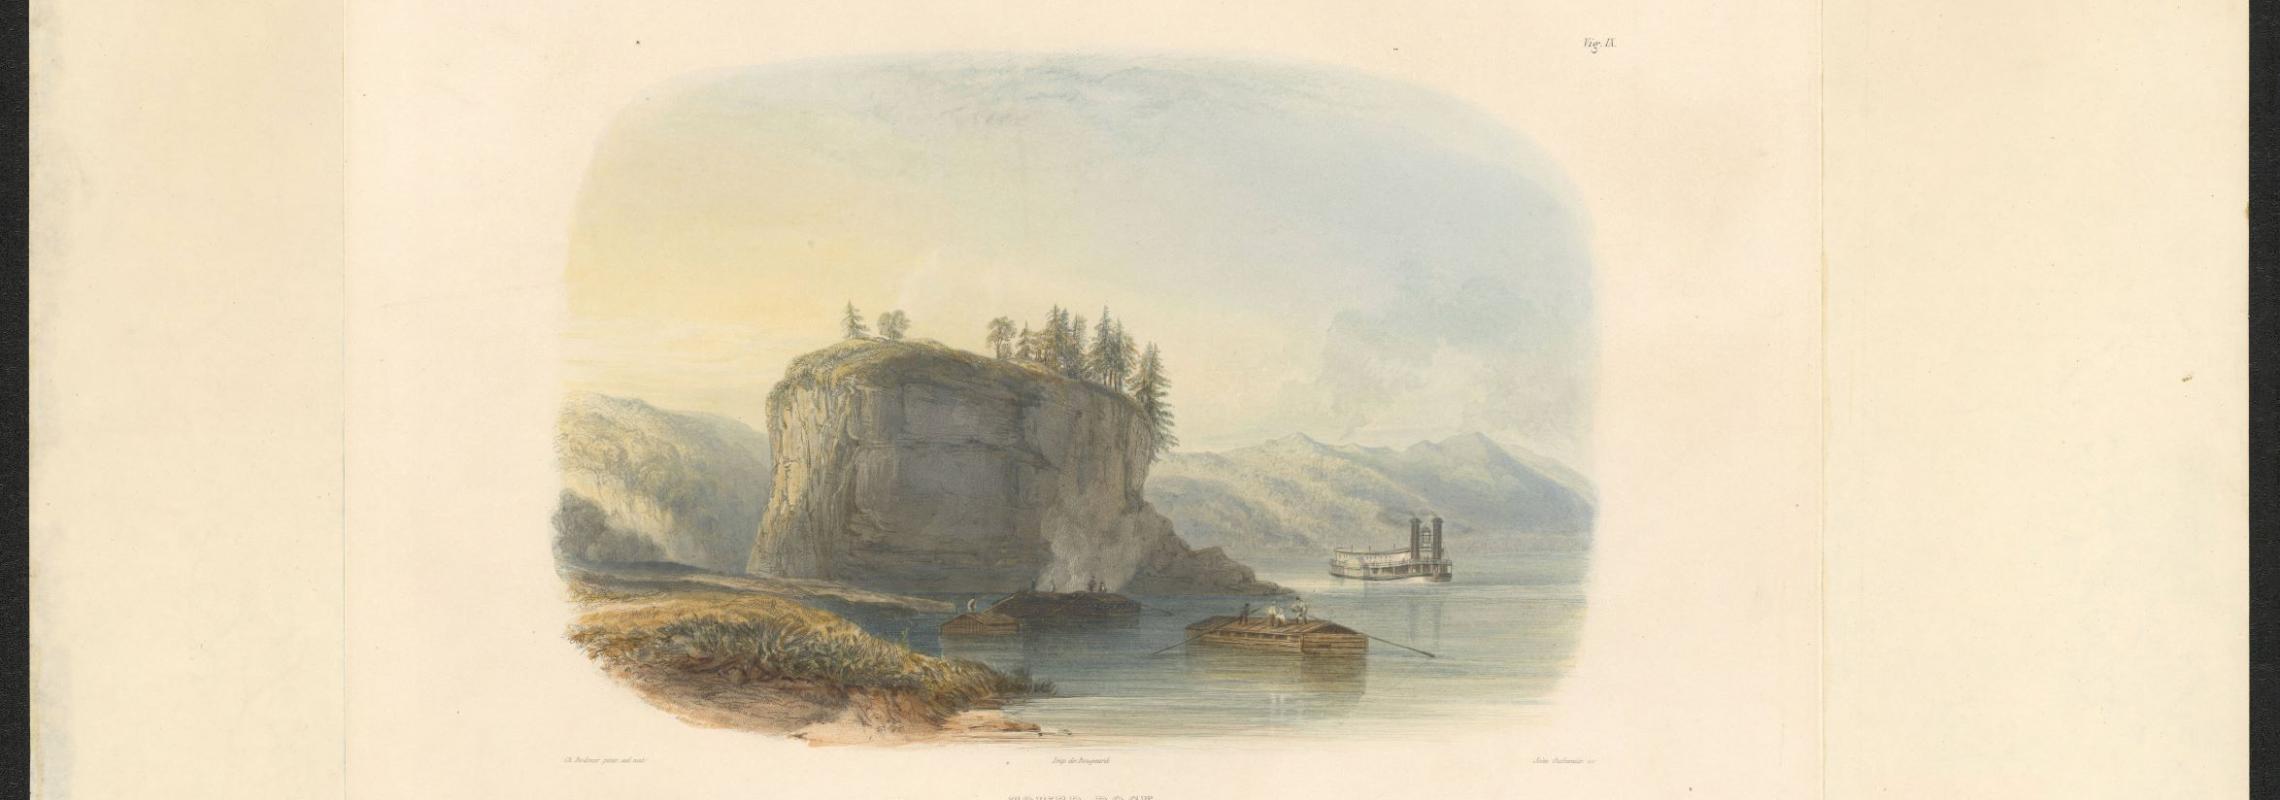 Tower Rock on the Mississippi River by Karl Bodmer